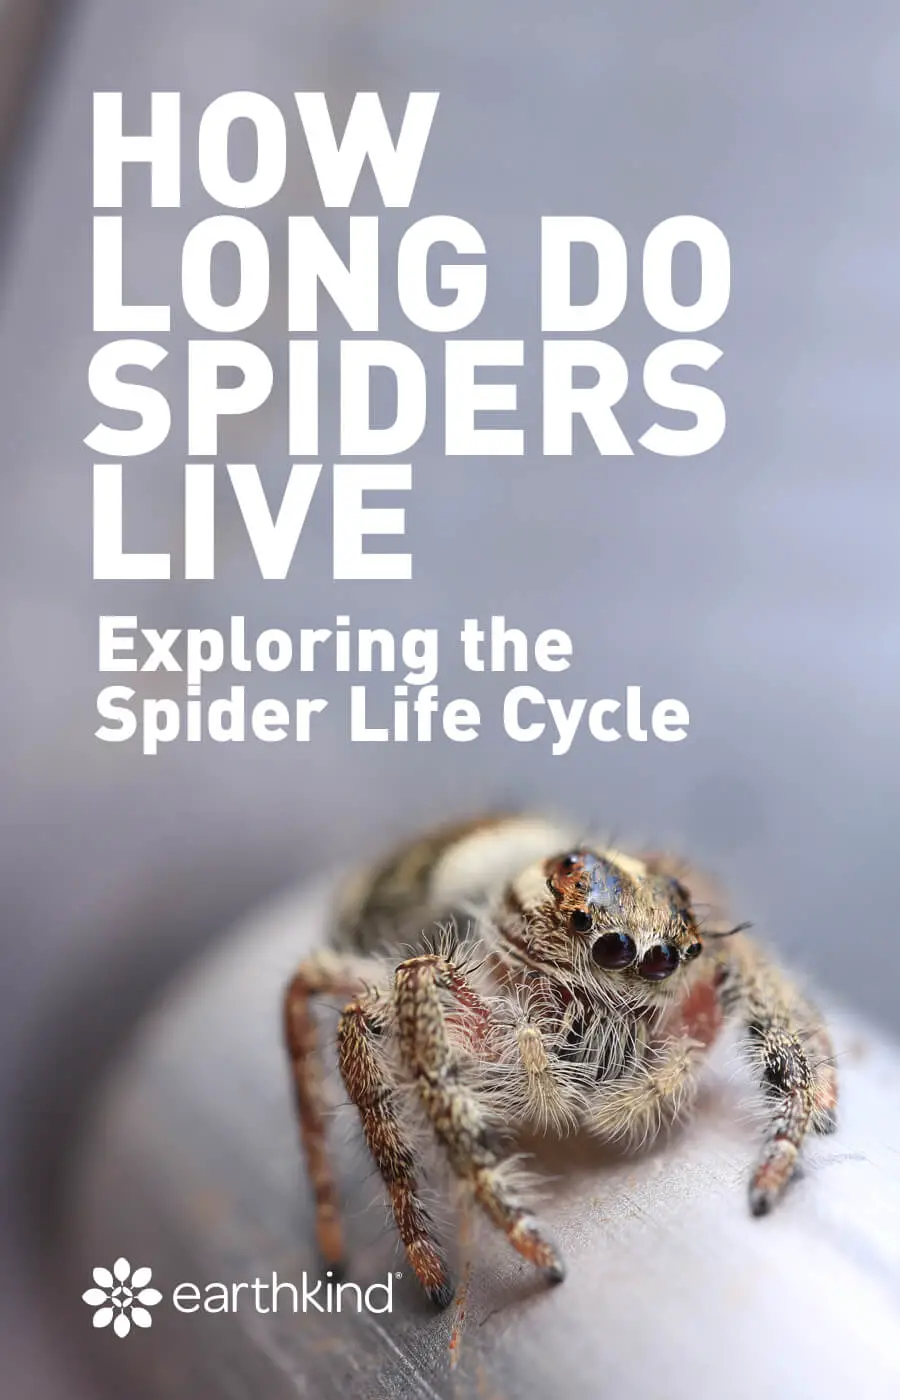 How Long Do Spiders Live?